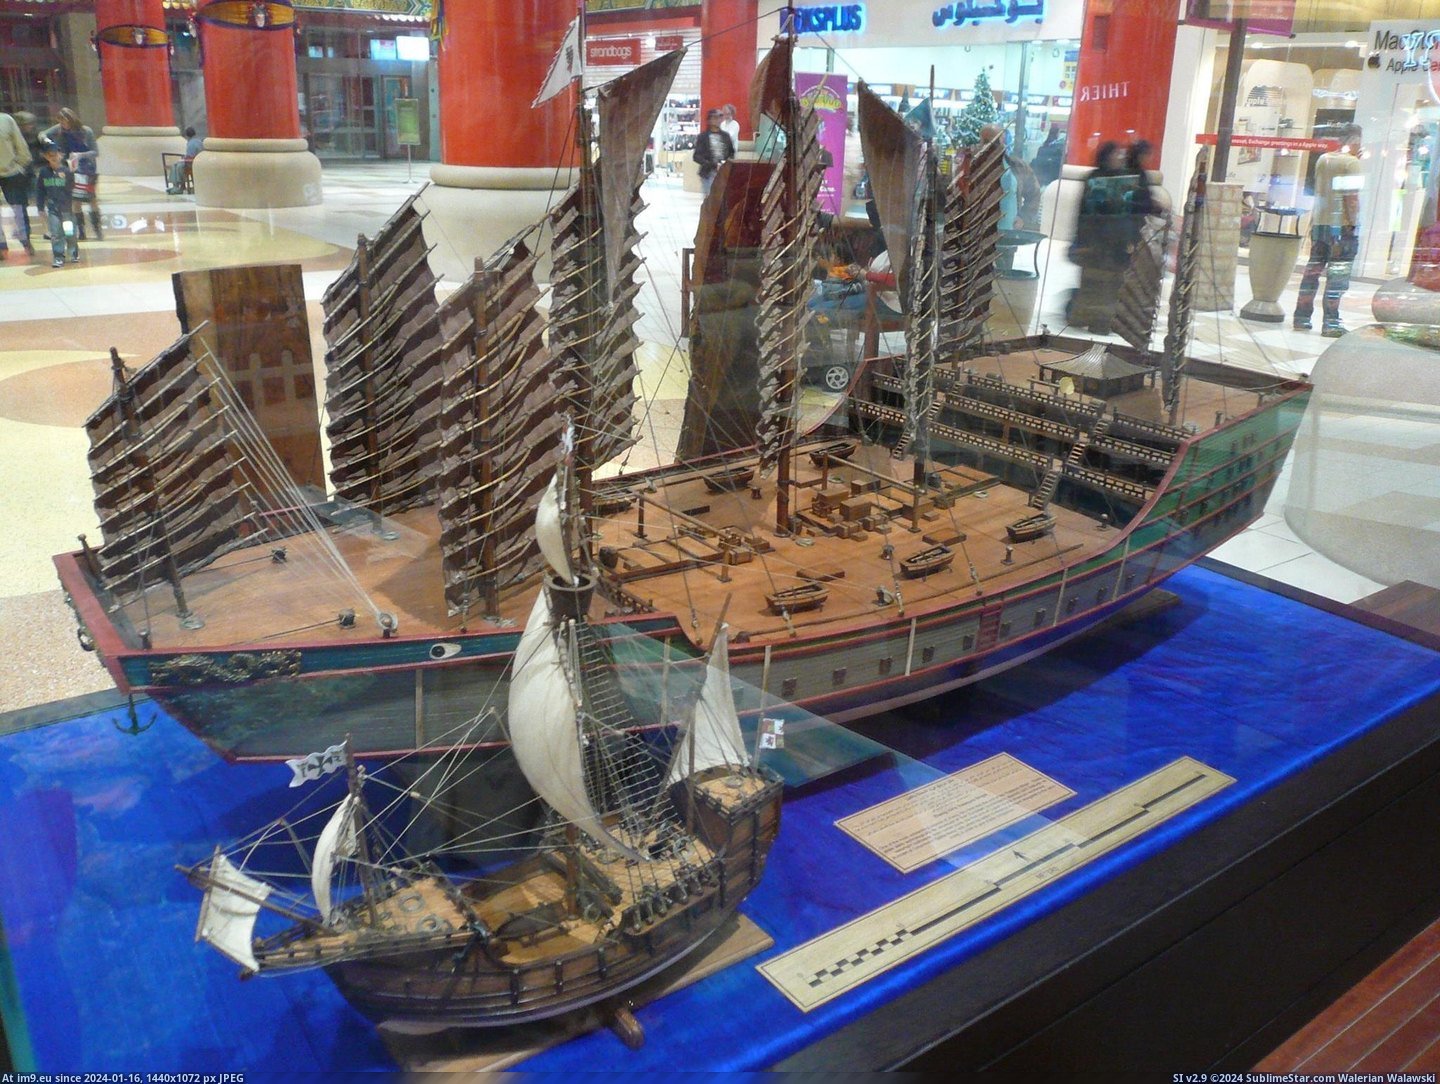 #Time #Santa #Chinese #Lived #Explorer #Christopher #Maria #Ship #Compared [Pics] Chinese explorer Zheng He's ship compared to Christopher Columbus' Santa Maria. Both lived and sailed at the same time. Pic. (Image of album My r/PICS favs))